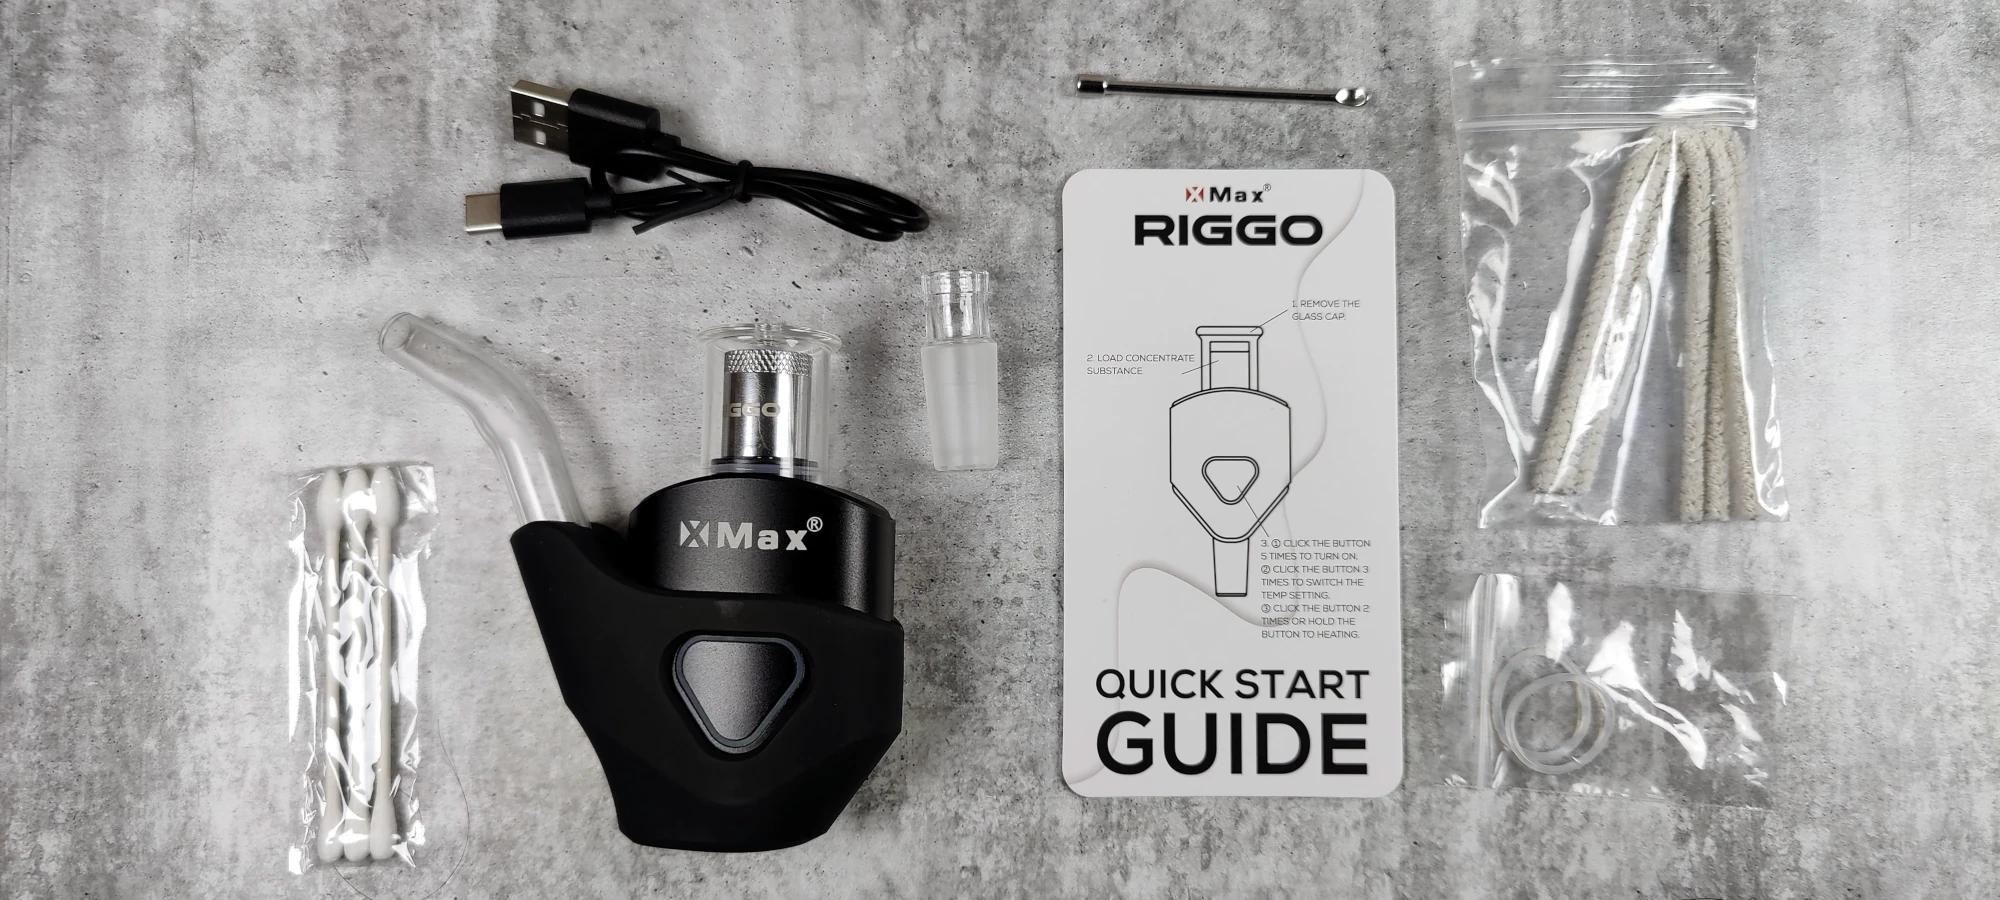 XMAX Riggo package contents